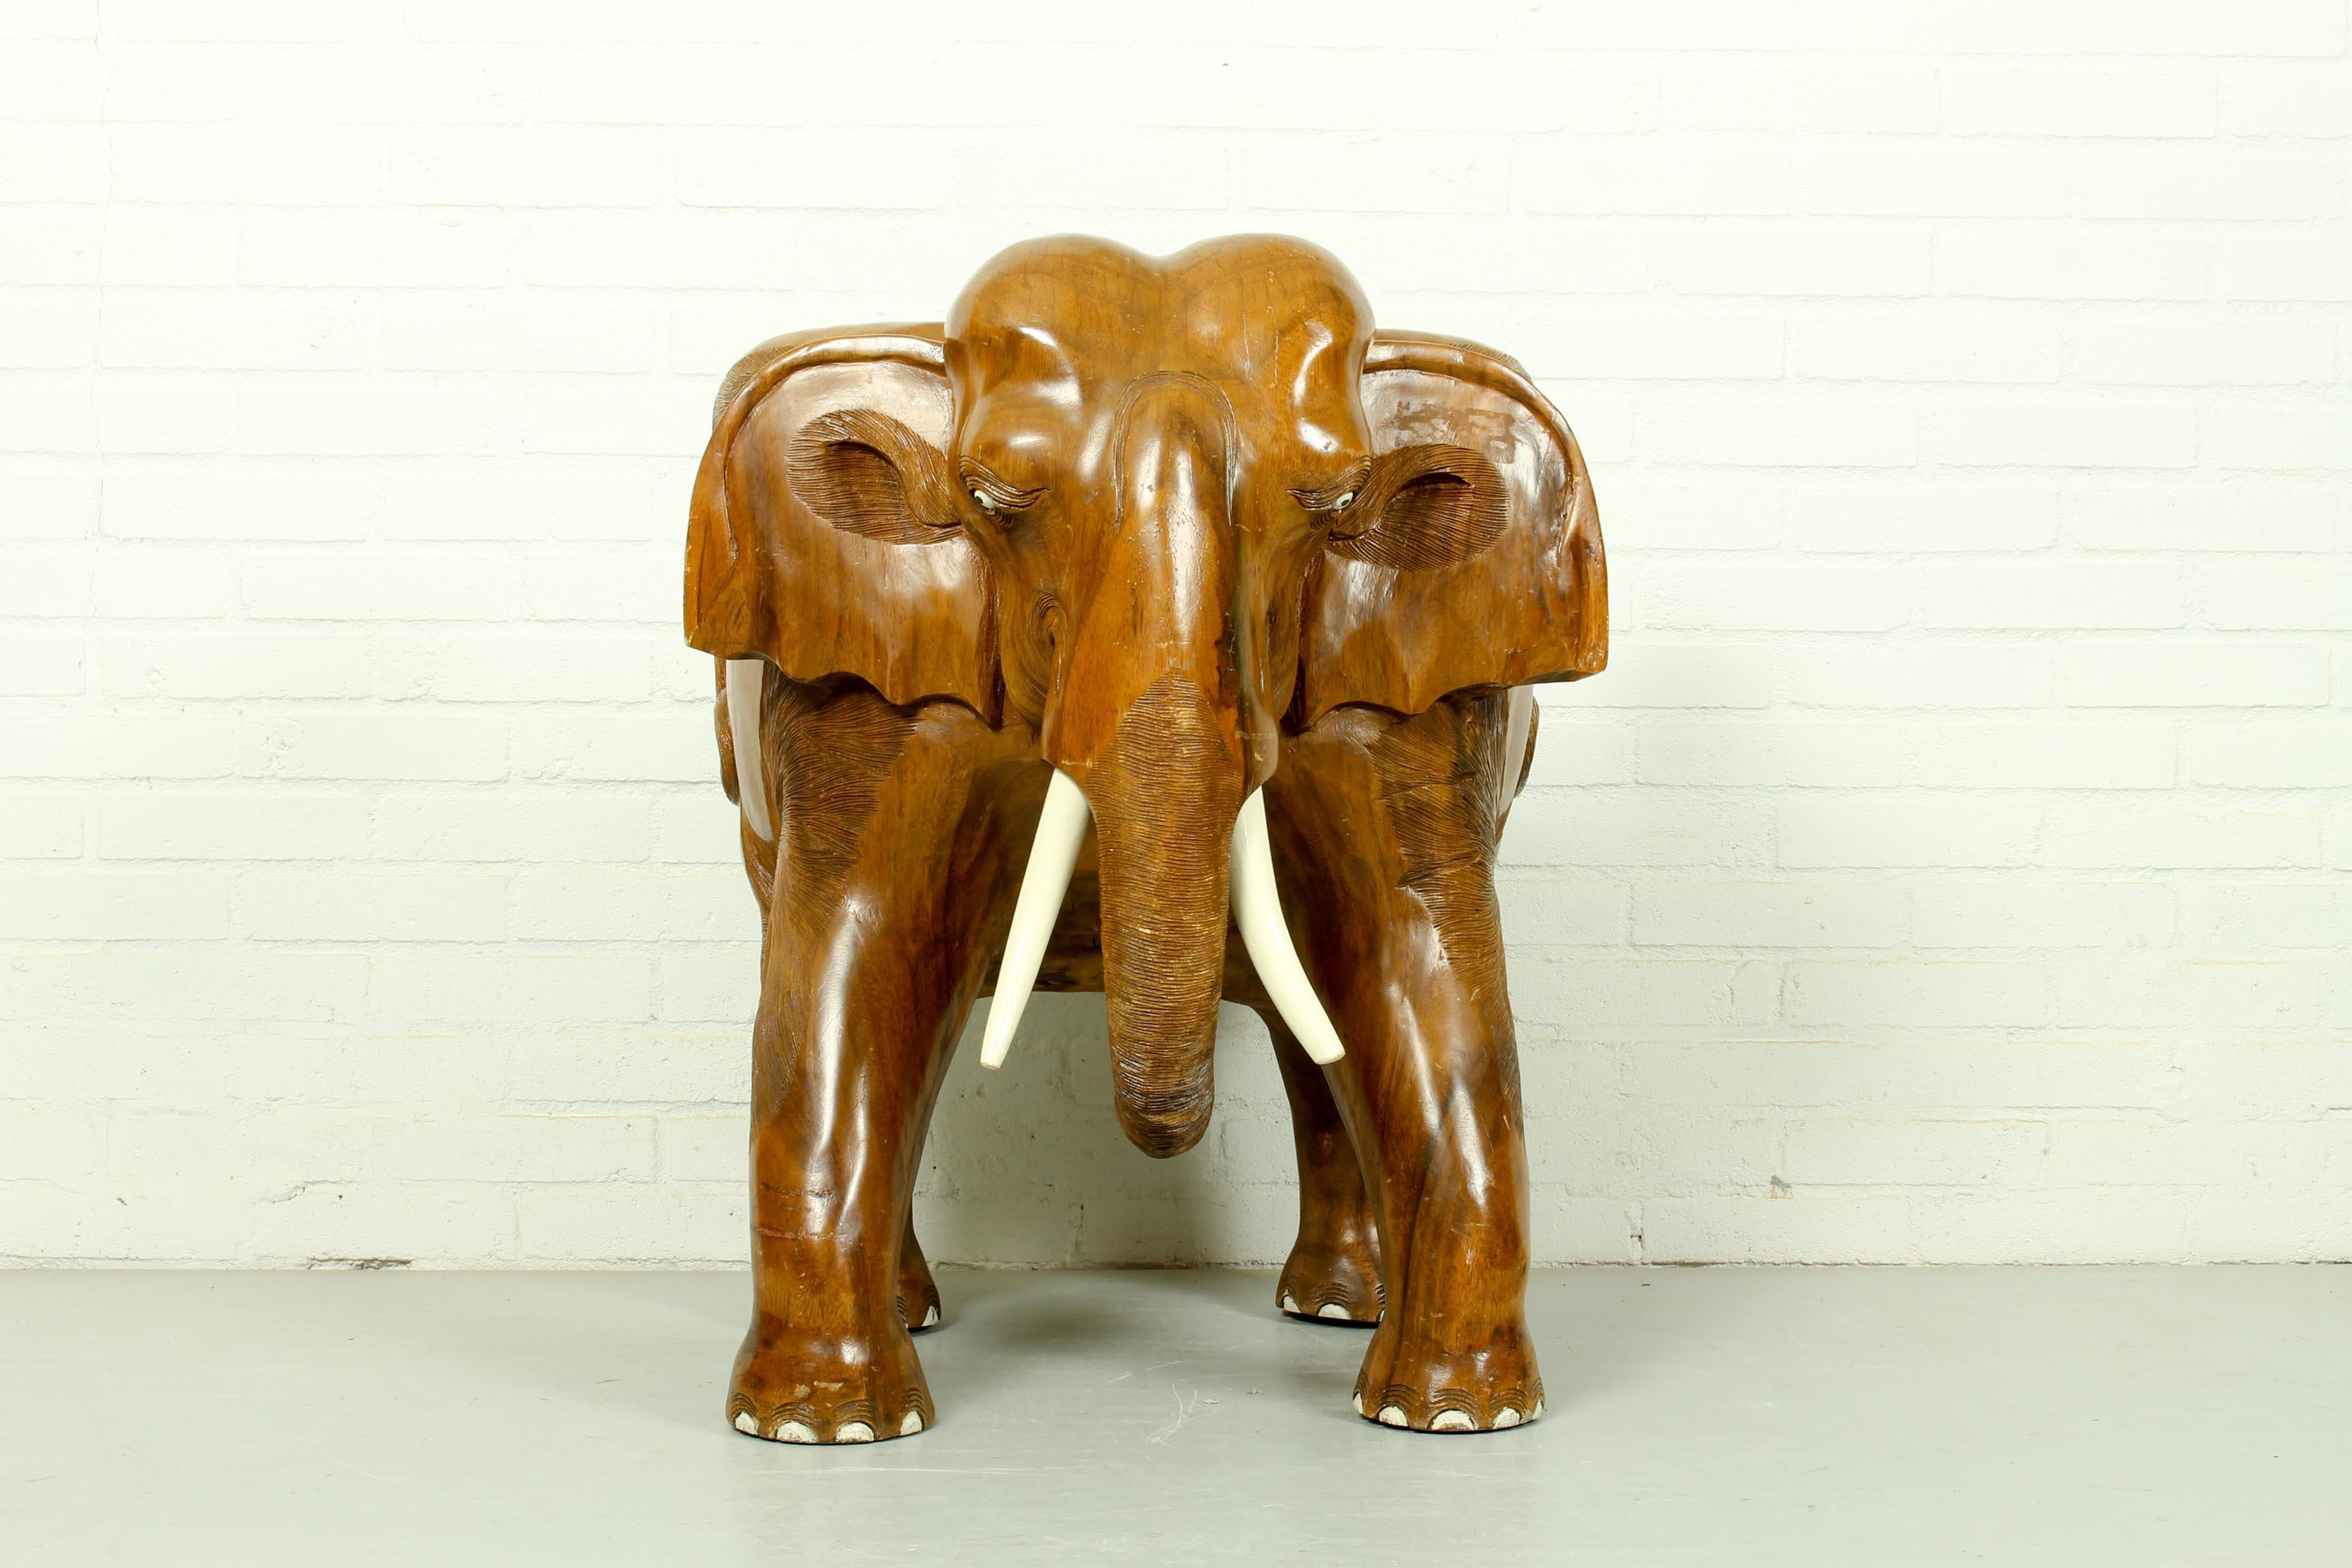 Teak chair sculpted as elephant. Great for children's room.
   